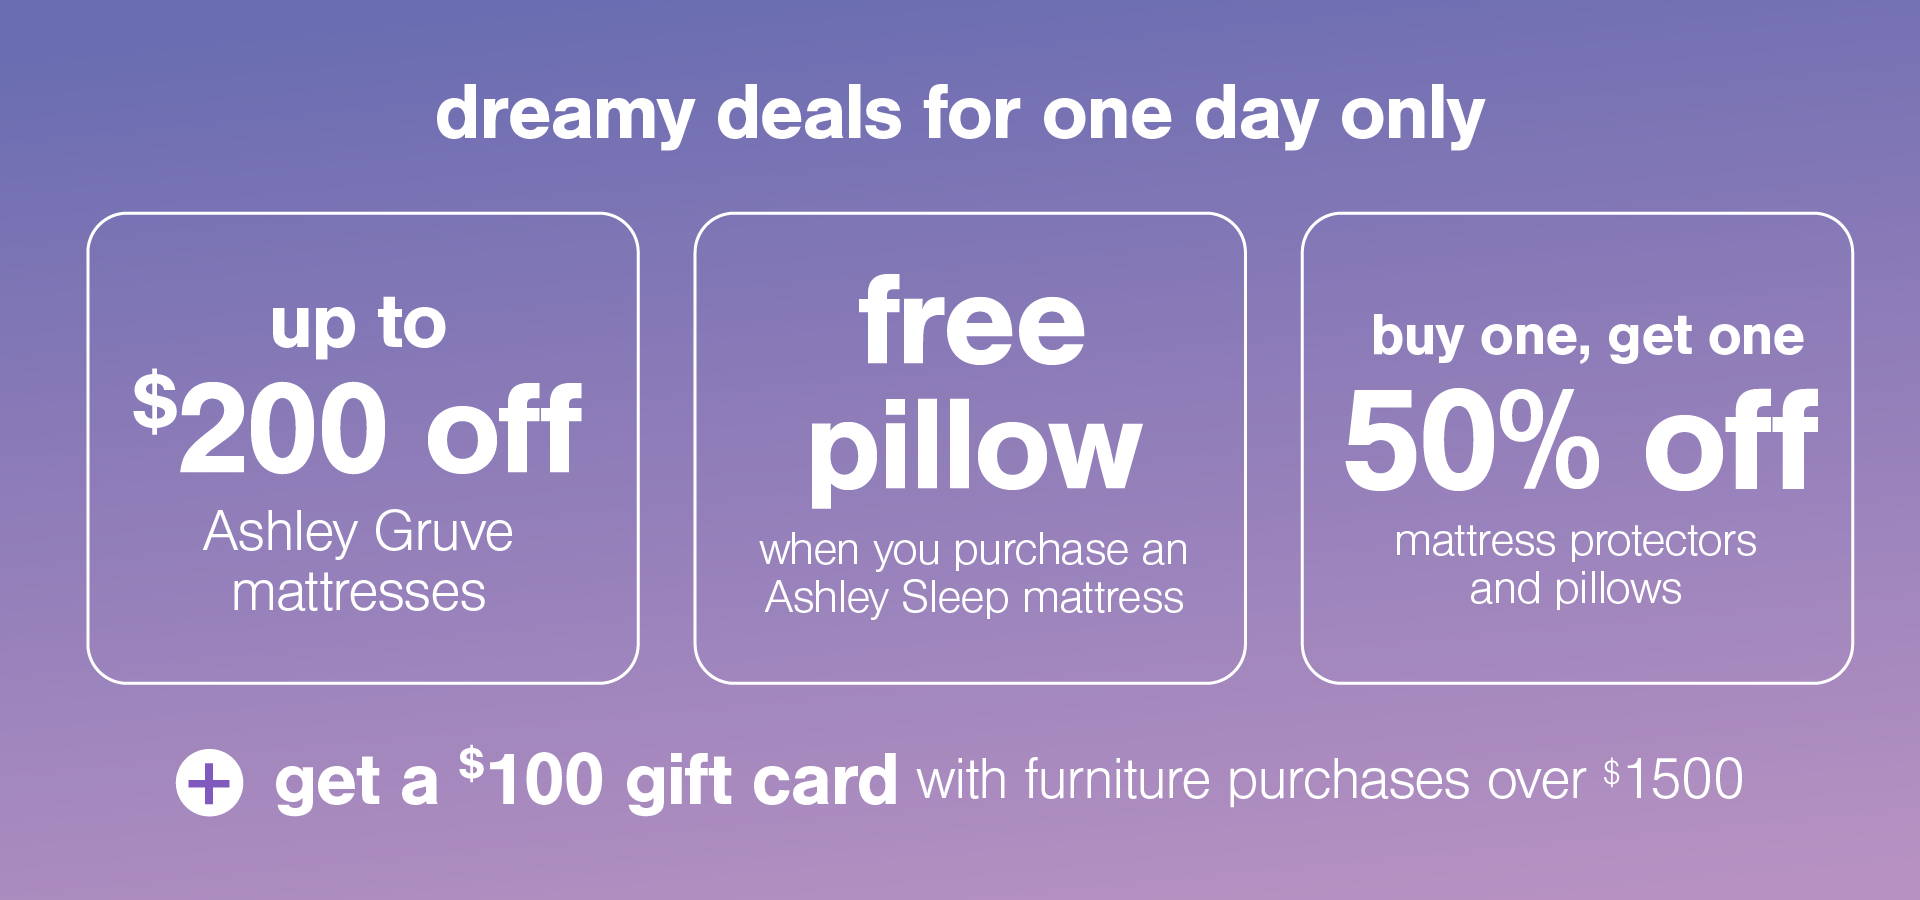 dreamy deals one day only up to $200 off Ashley Sleep Mattresses + $100 gift card with furniture purchases over $1500 